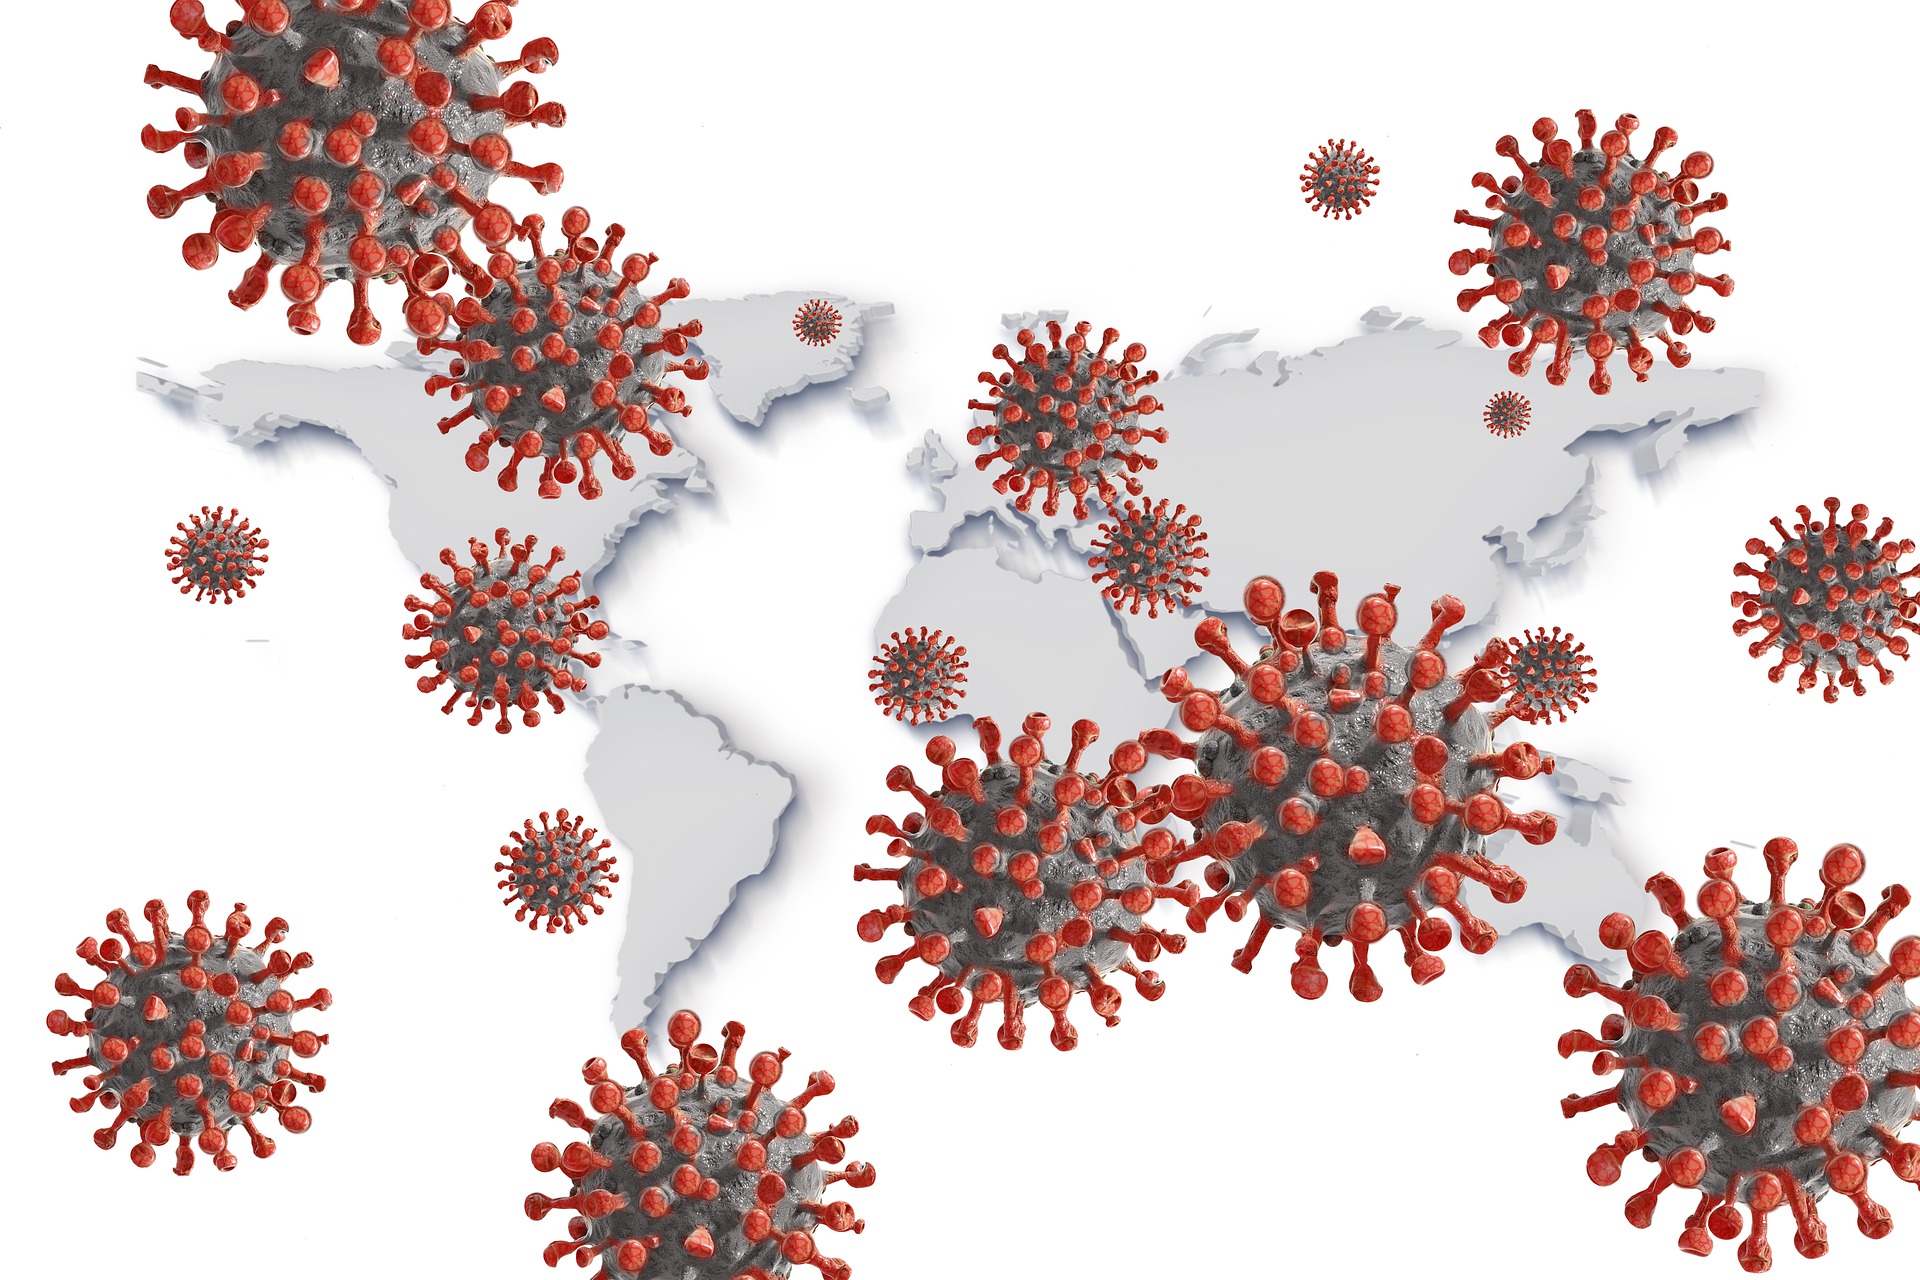 Conronavirus images superimposed on a map of the world used as an illustration